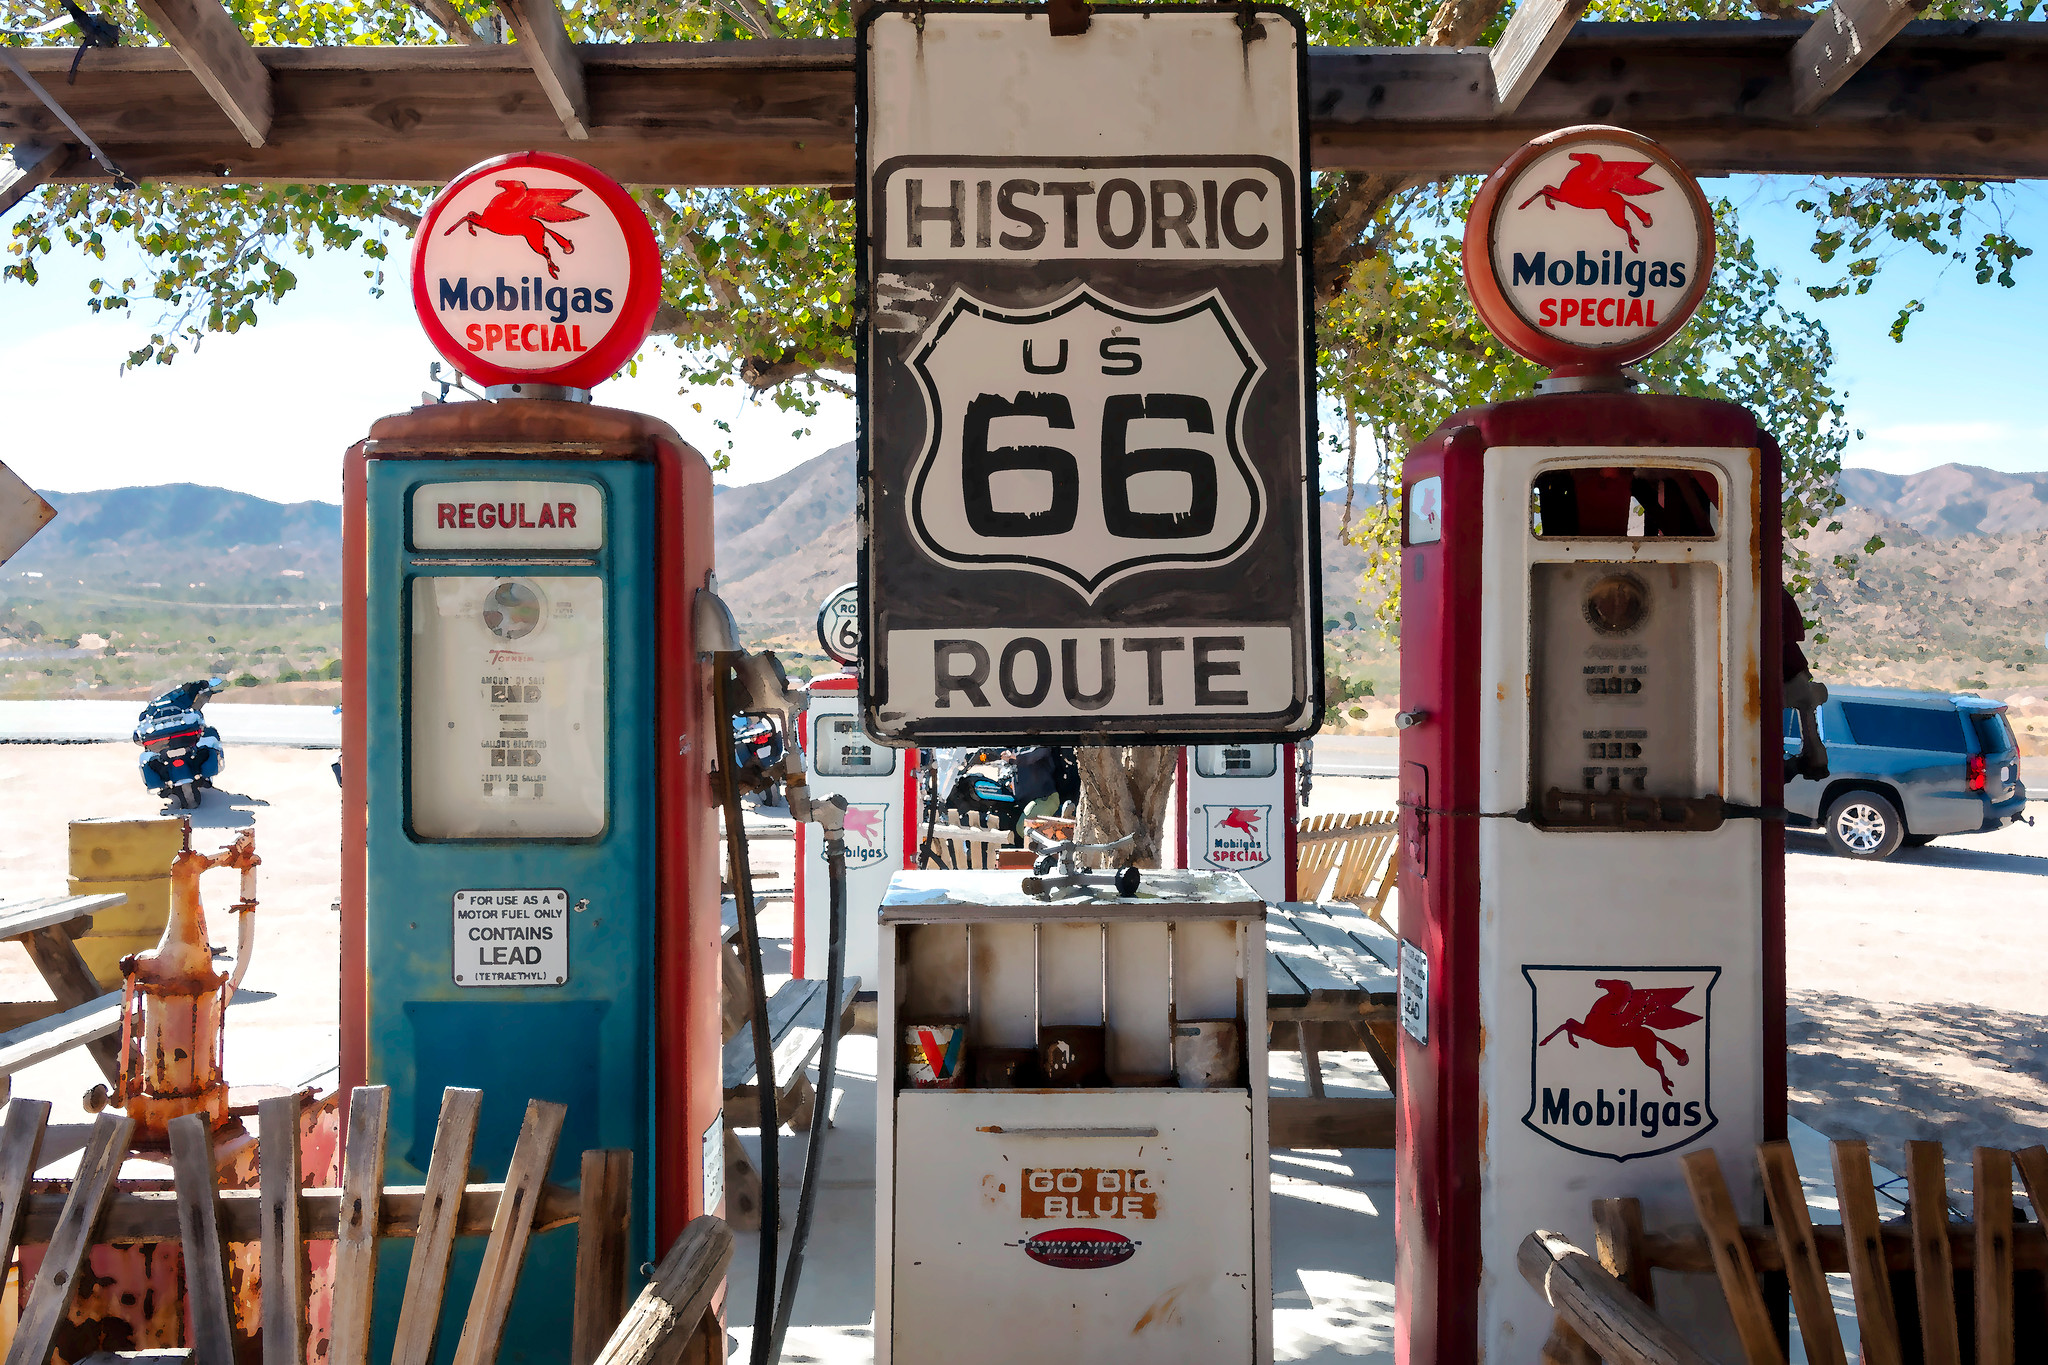 Hackberry Gas Pumps, Route 66, Arizona (by Eric Kilby CC BY-SA 2.0 DEED via Flickr).